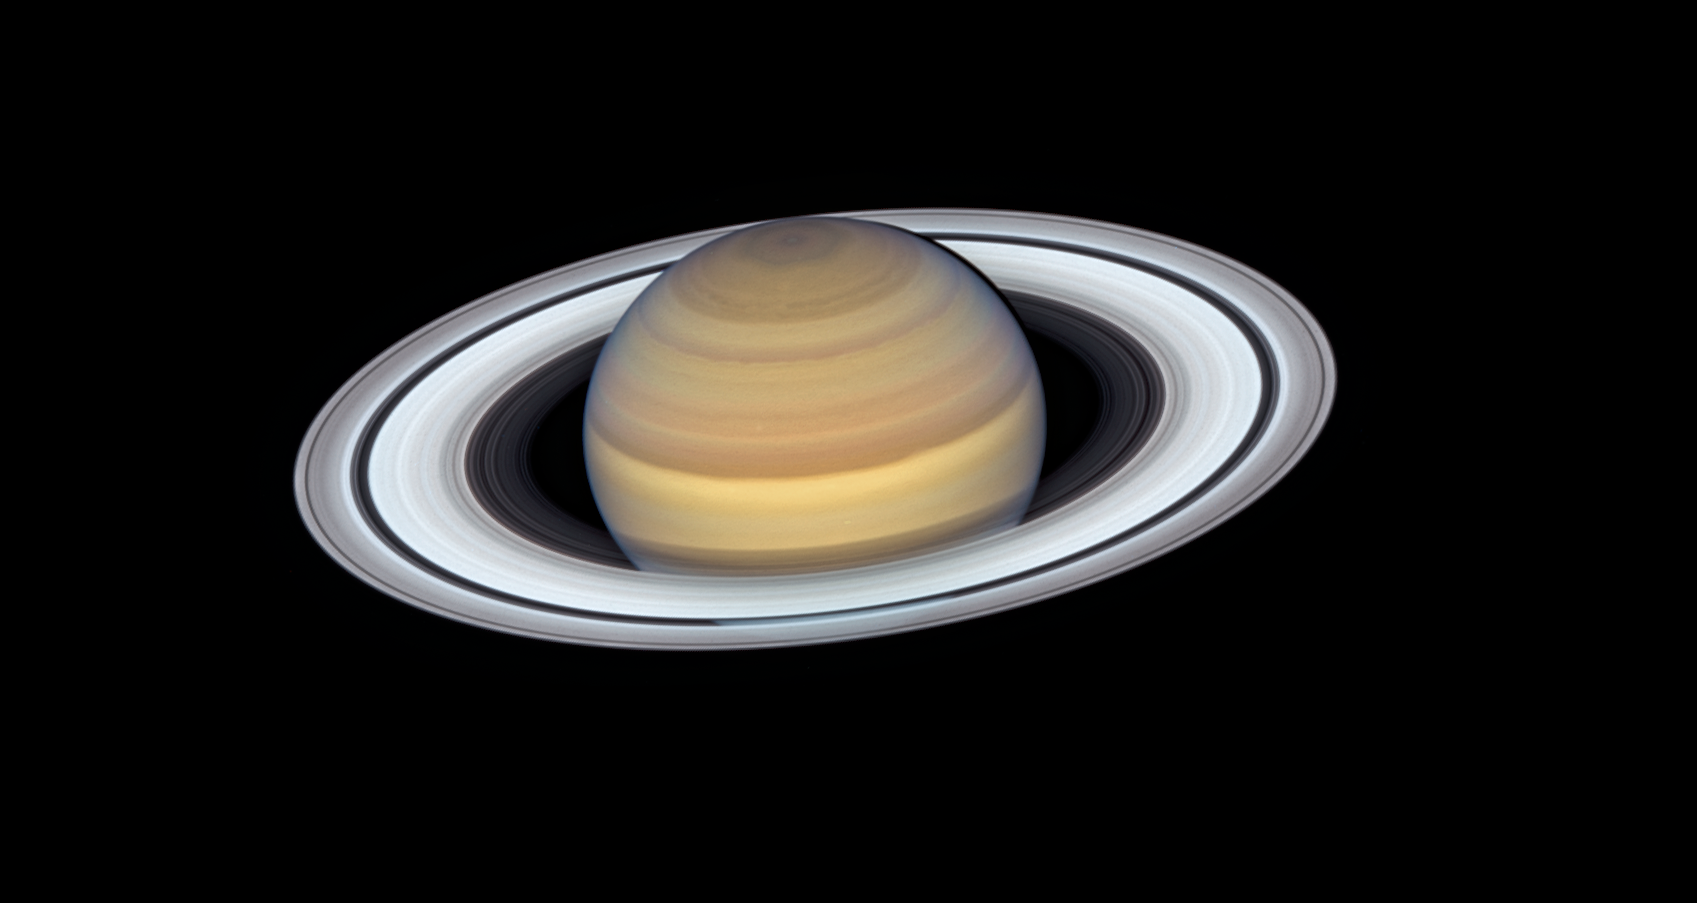 NASA snapped a new image of Saturn, and it's a real stunner